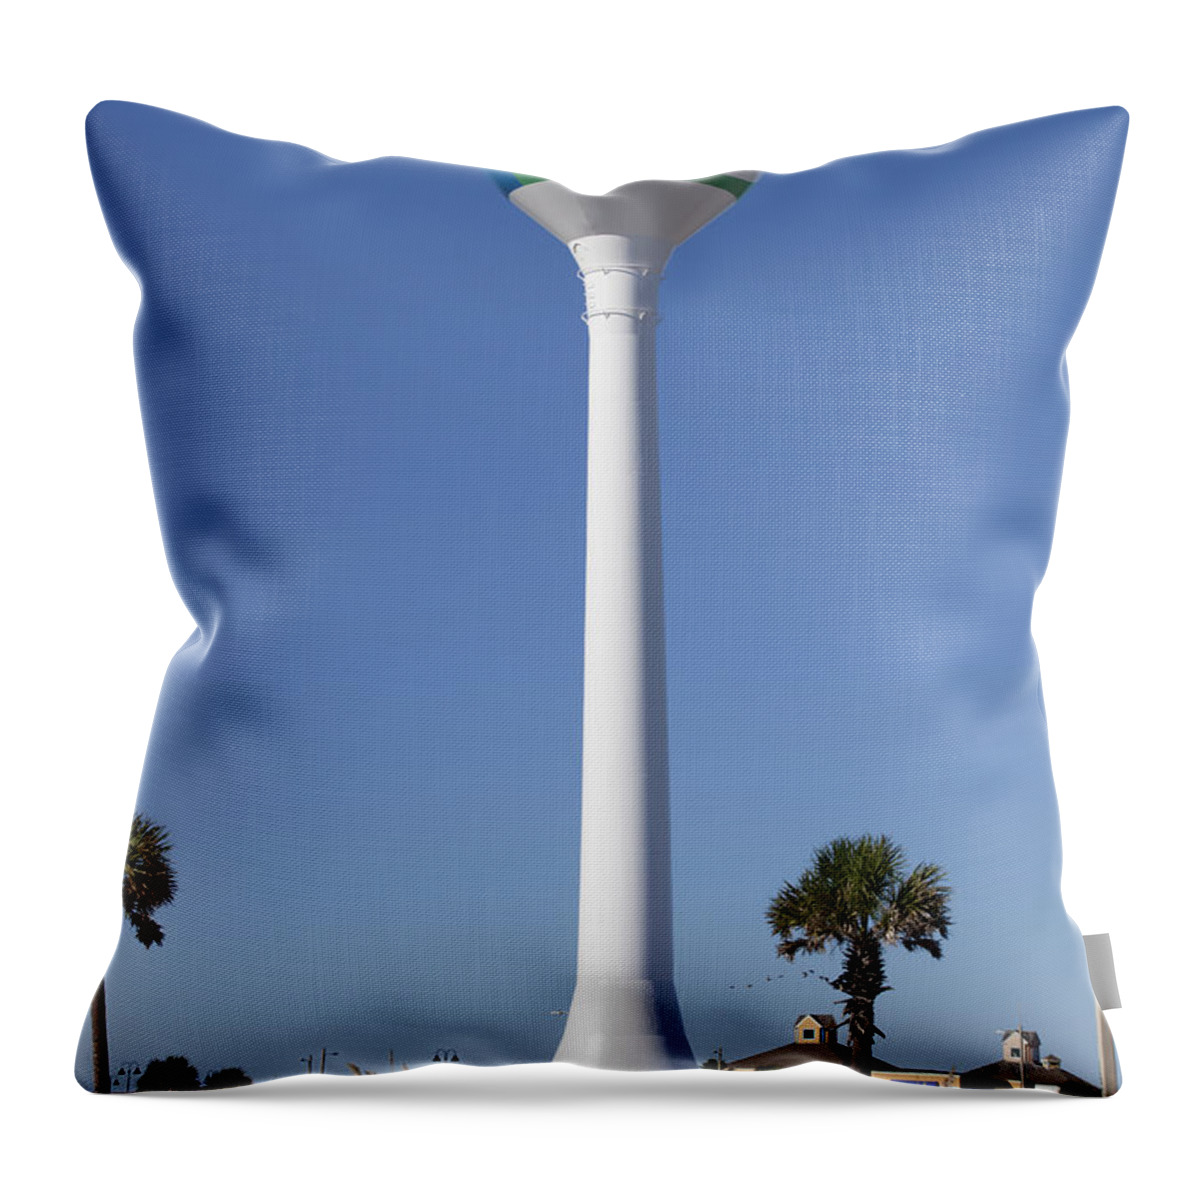 Florida Throw Pillow featuring the photograph Water Tower - Pensacola Beach Florida by Anthony Totah